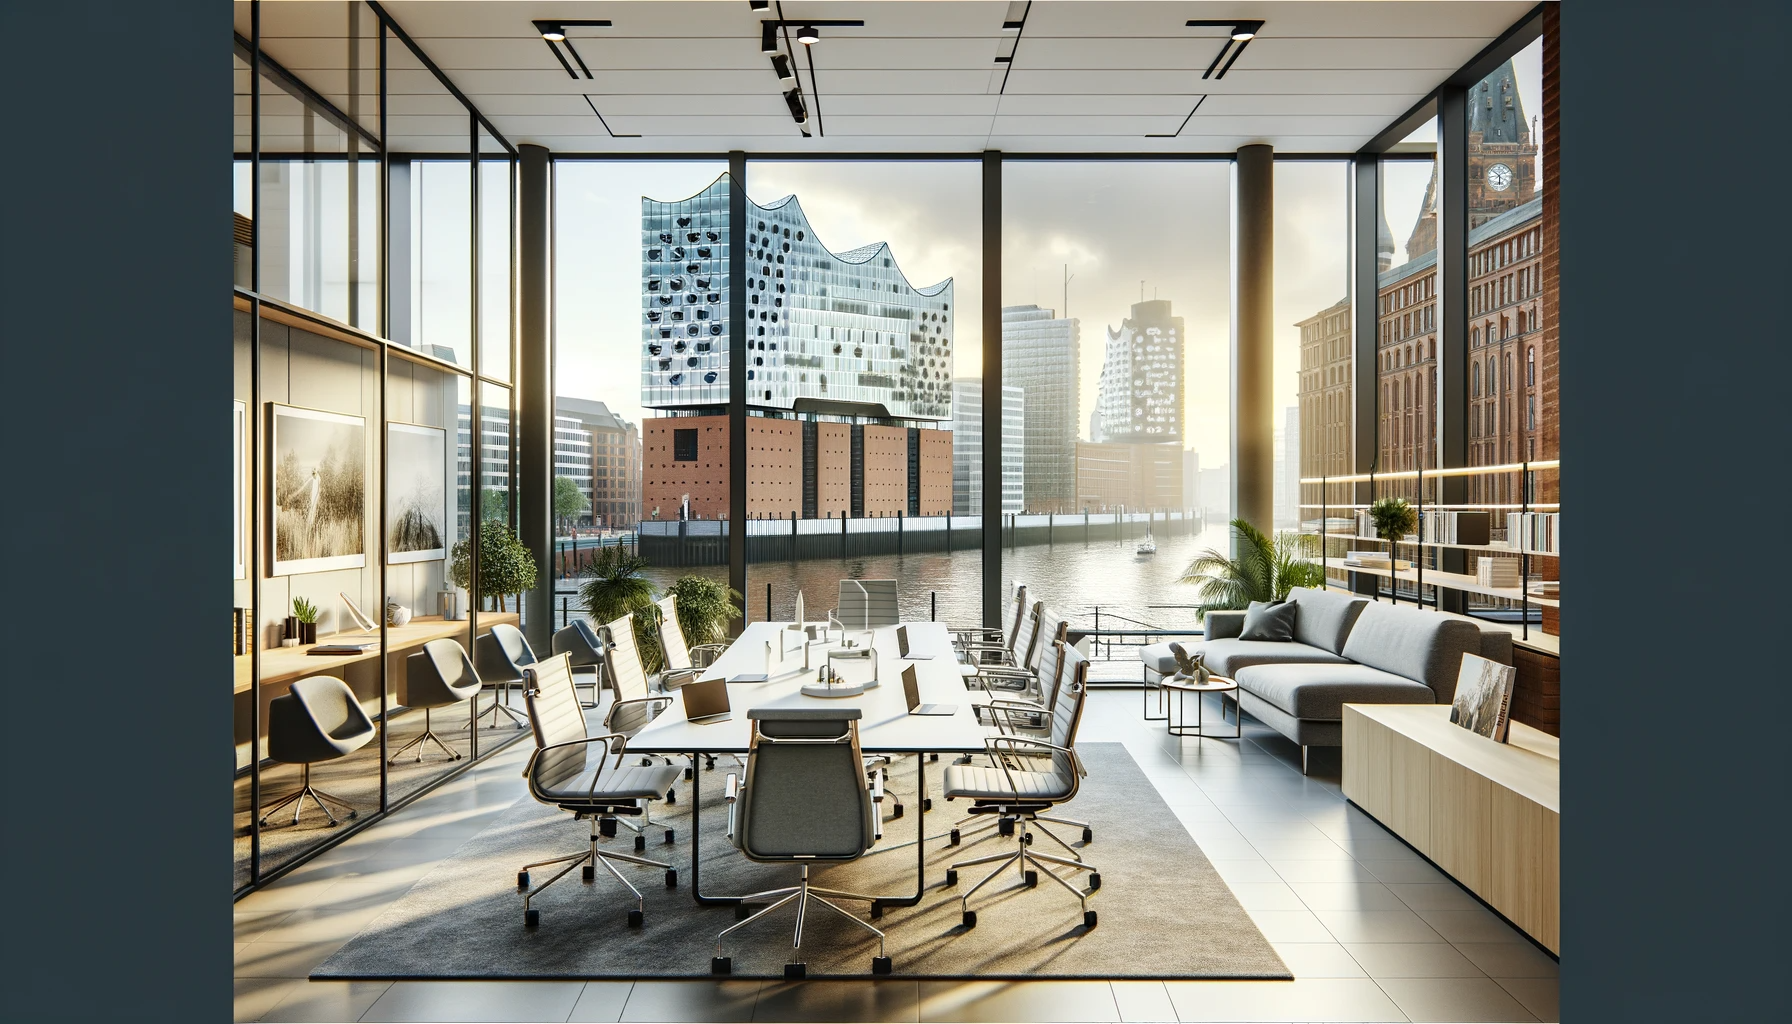 Example Hamburg: How can office spaces be successfully reduced?